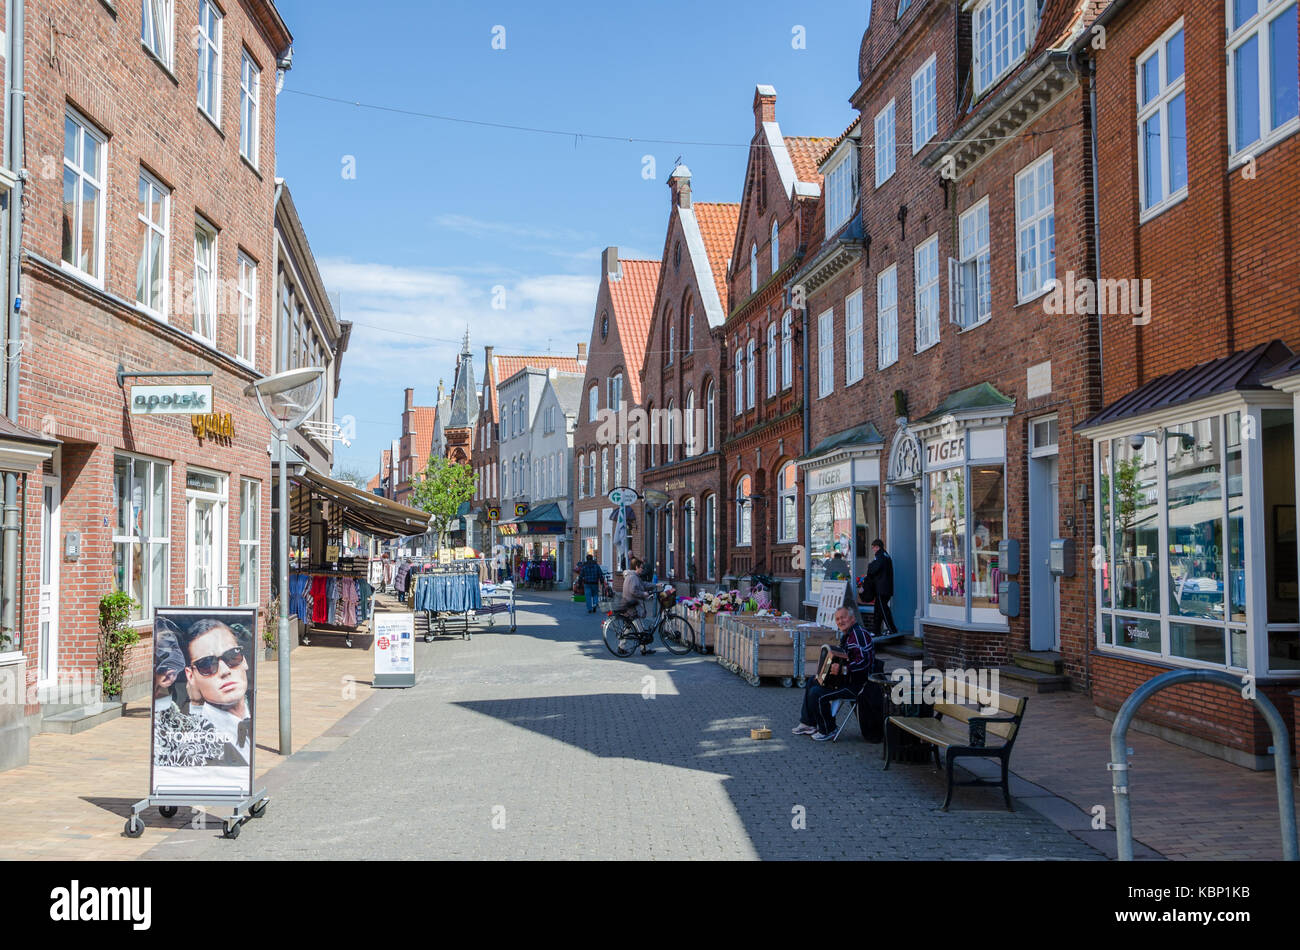 TONDER, DENMARK - APRIL 30 2012: Historical red brick buildings in small Danish town Tonder during early spring, Europe Stock Photo